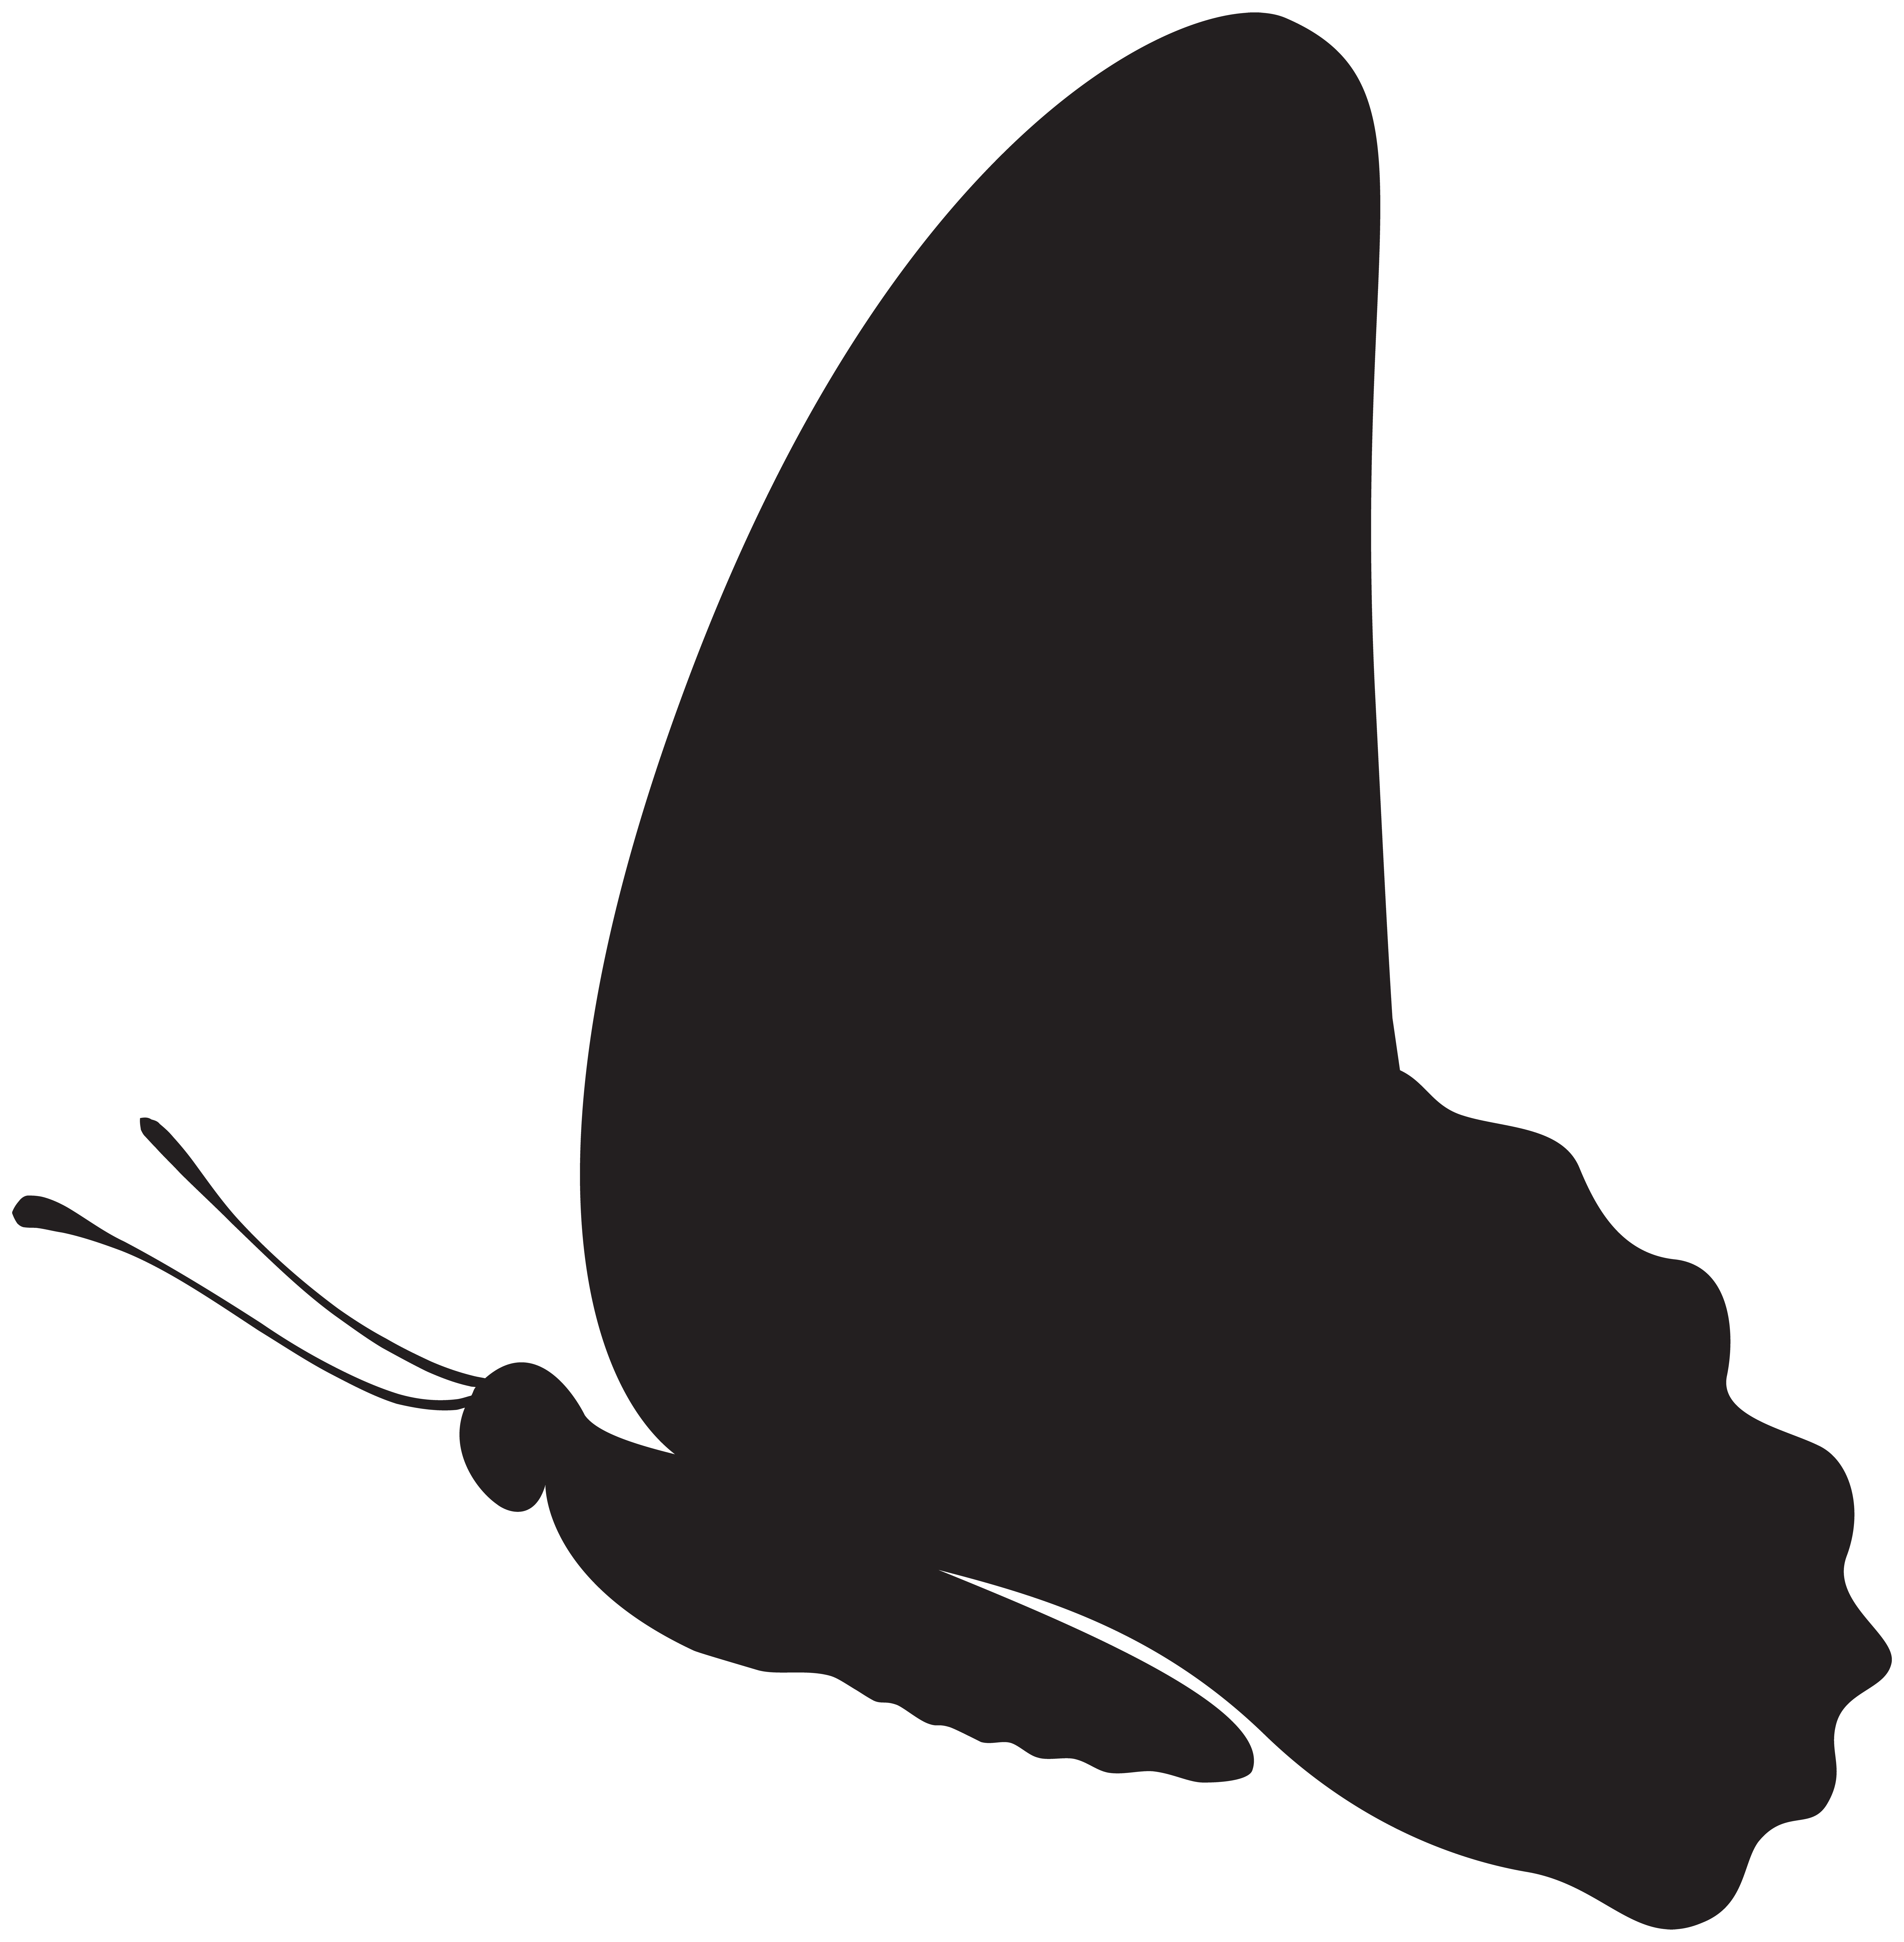 Download Butterfly Silhouette Clip Art PNG Image | Gallery ...